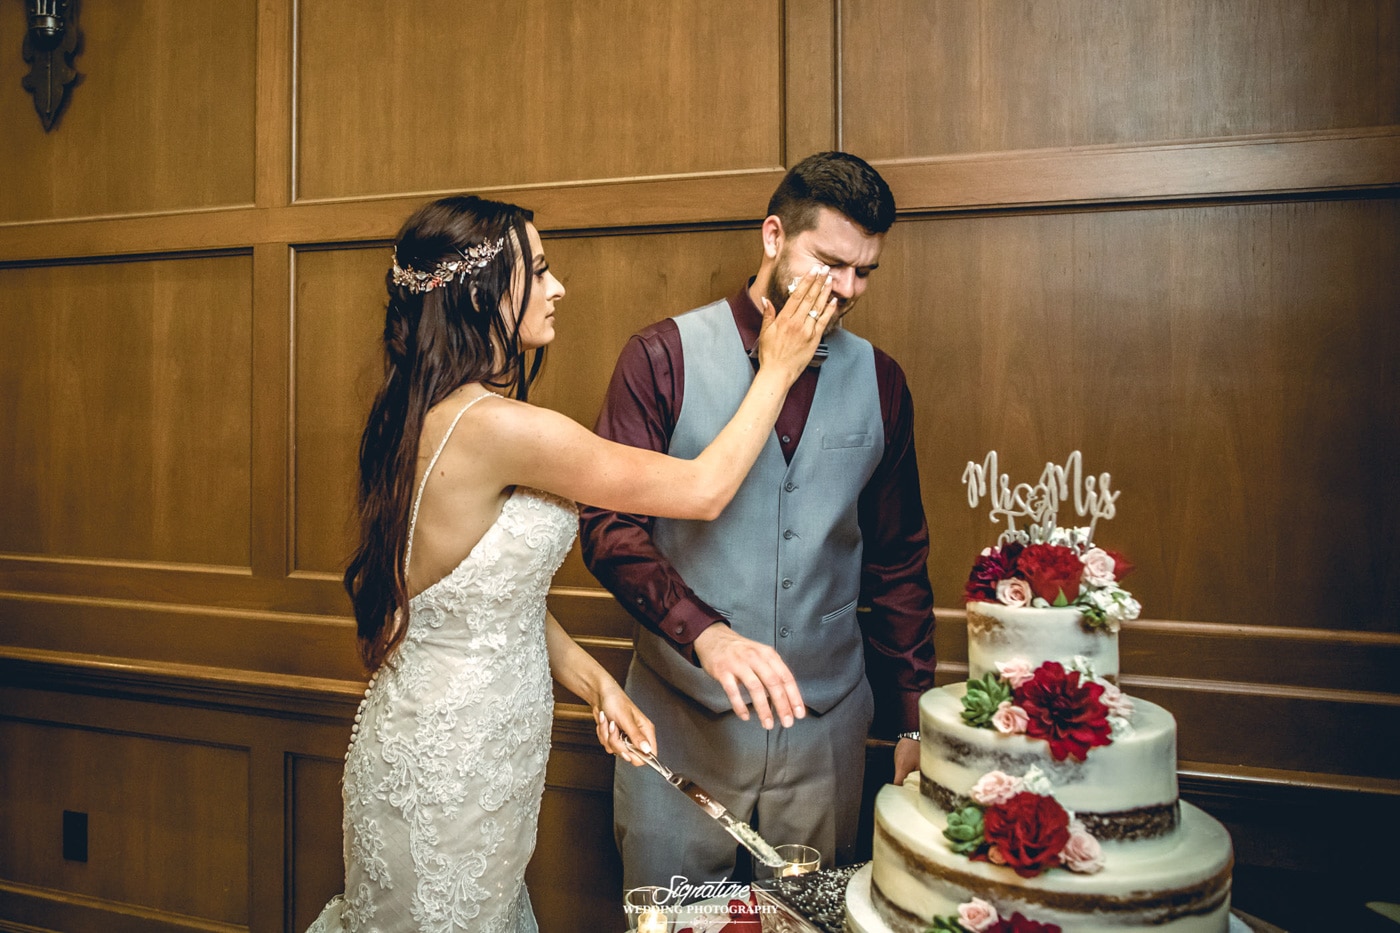 Bride putting cake on groom's face